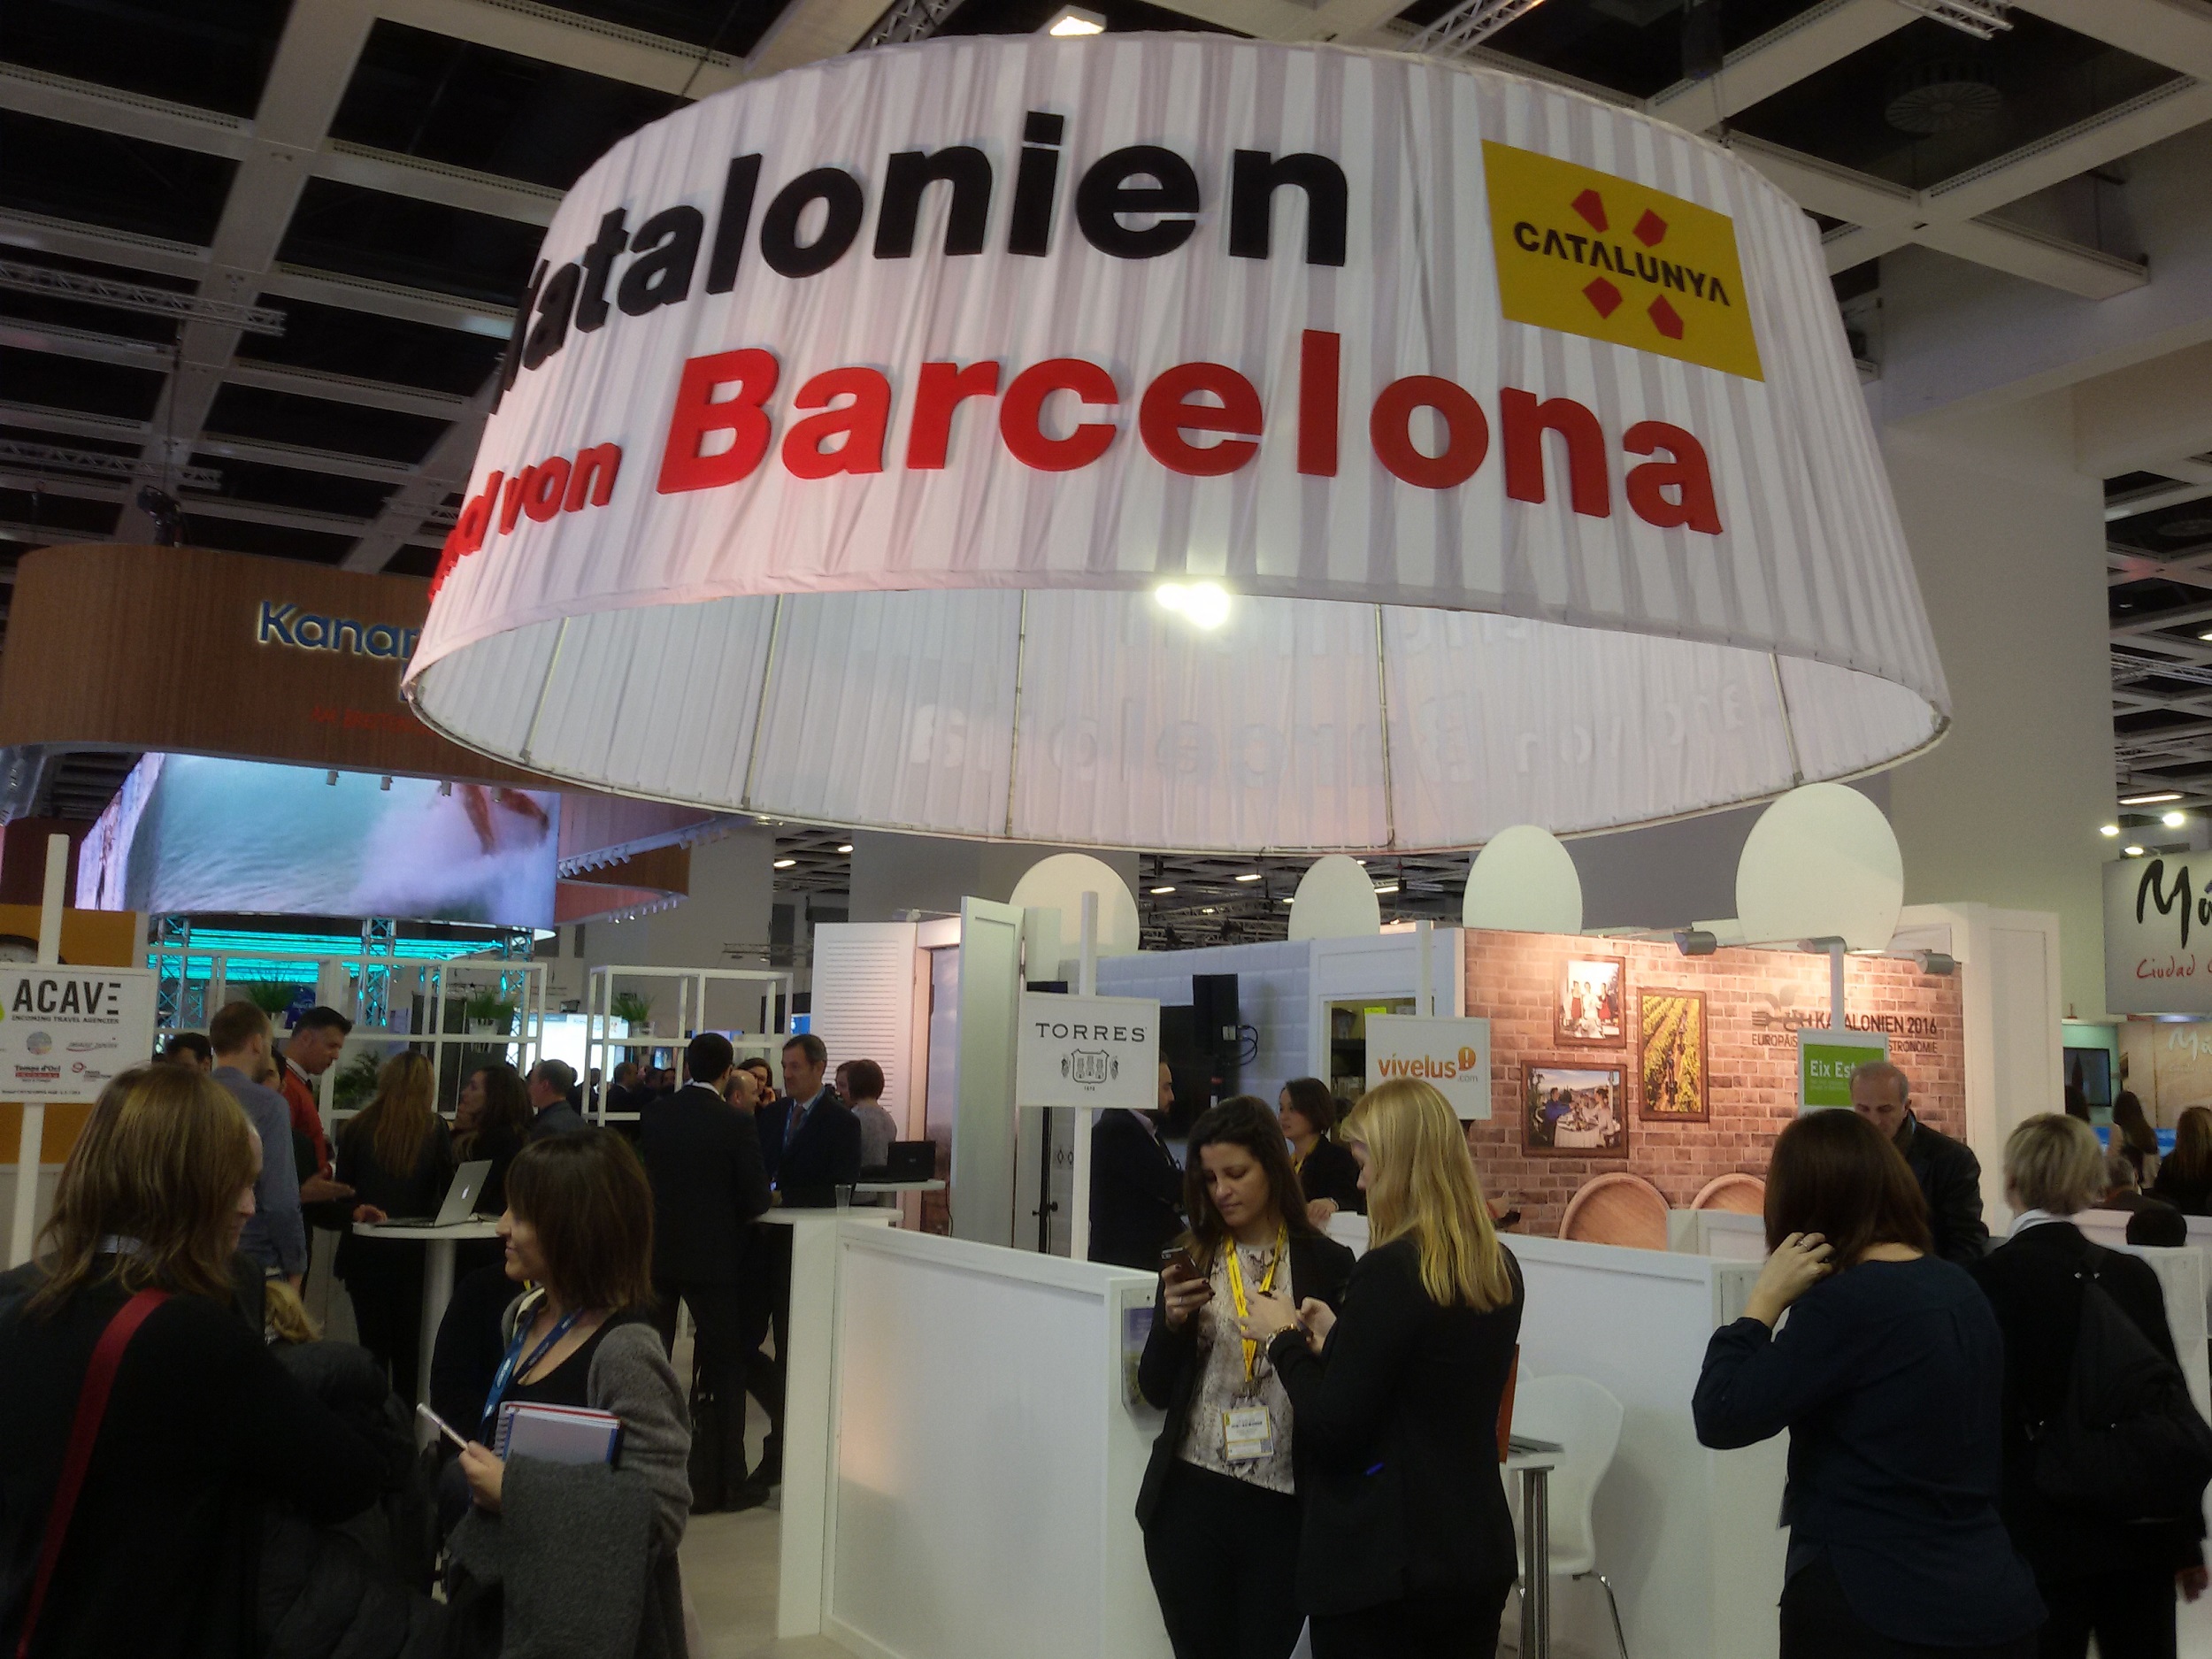 The Catalan stand at ITB Berlin (by ACN)